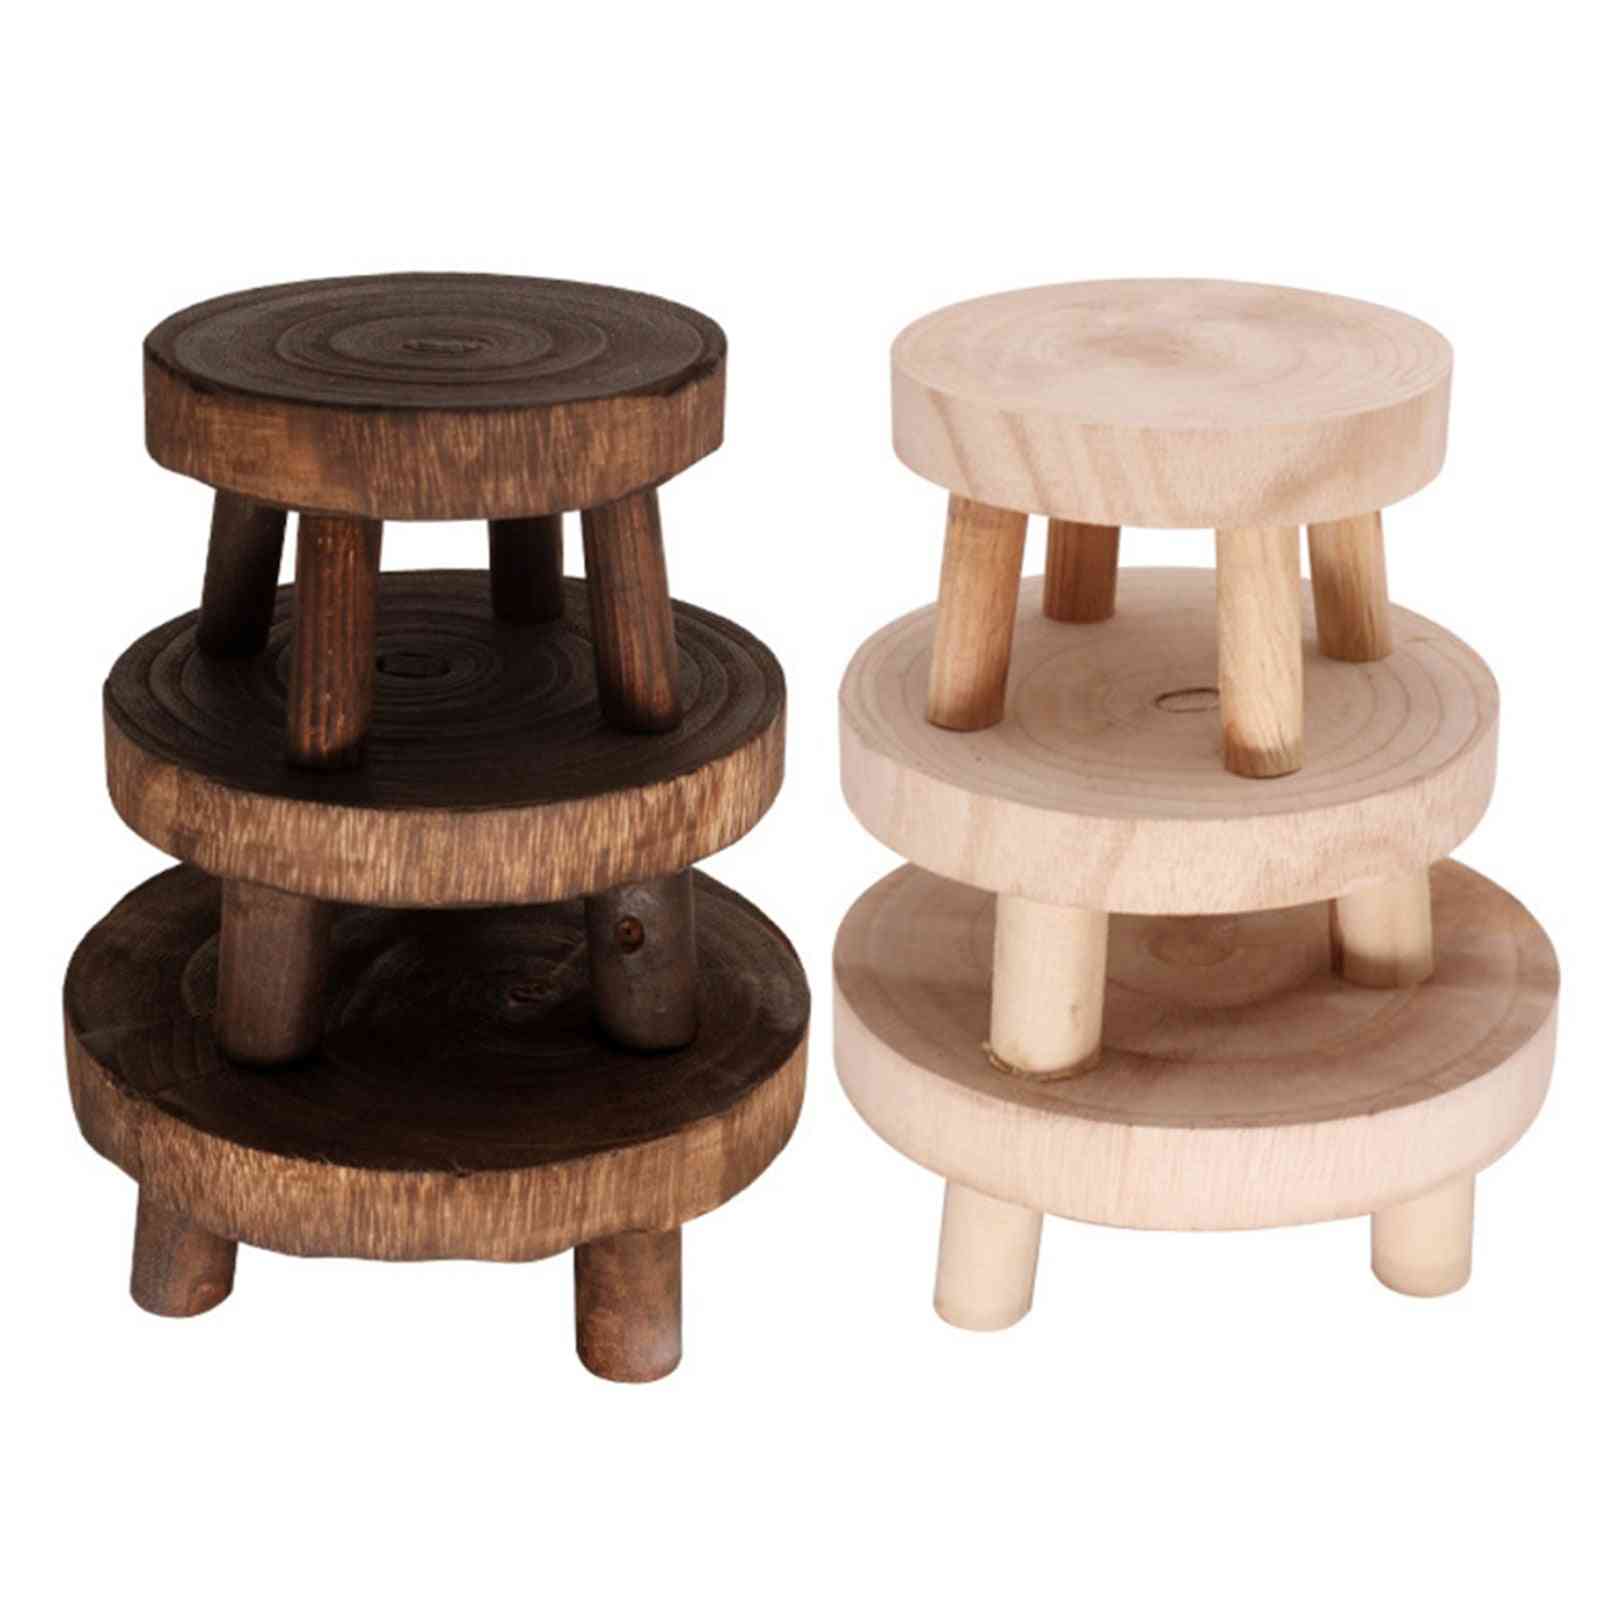 Wooden Flower Pot Stand Small Bench Footstool Art Plant Planter Display Holder